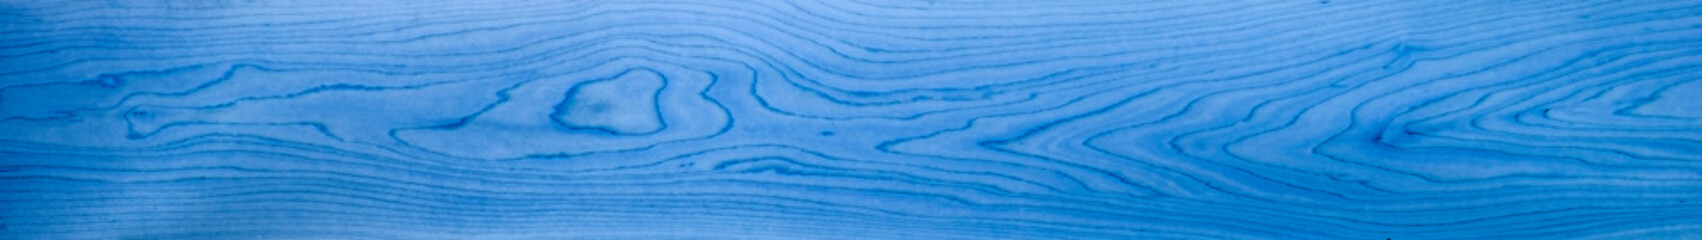 Blue wood panorama for banners, design, backdrops and headers - with abstract grain patterns, in a wooden background texture.